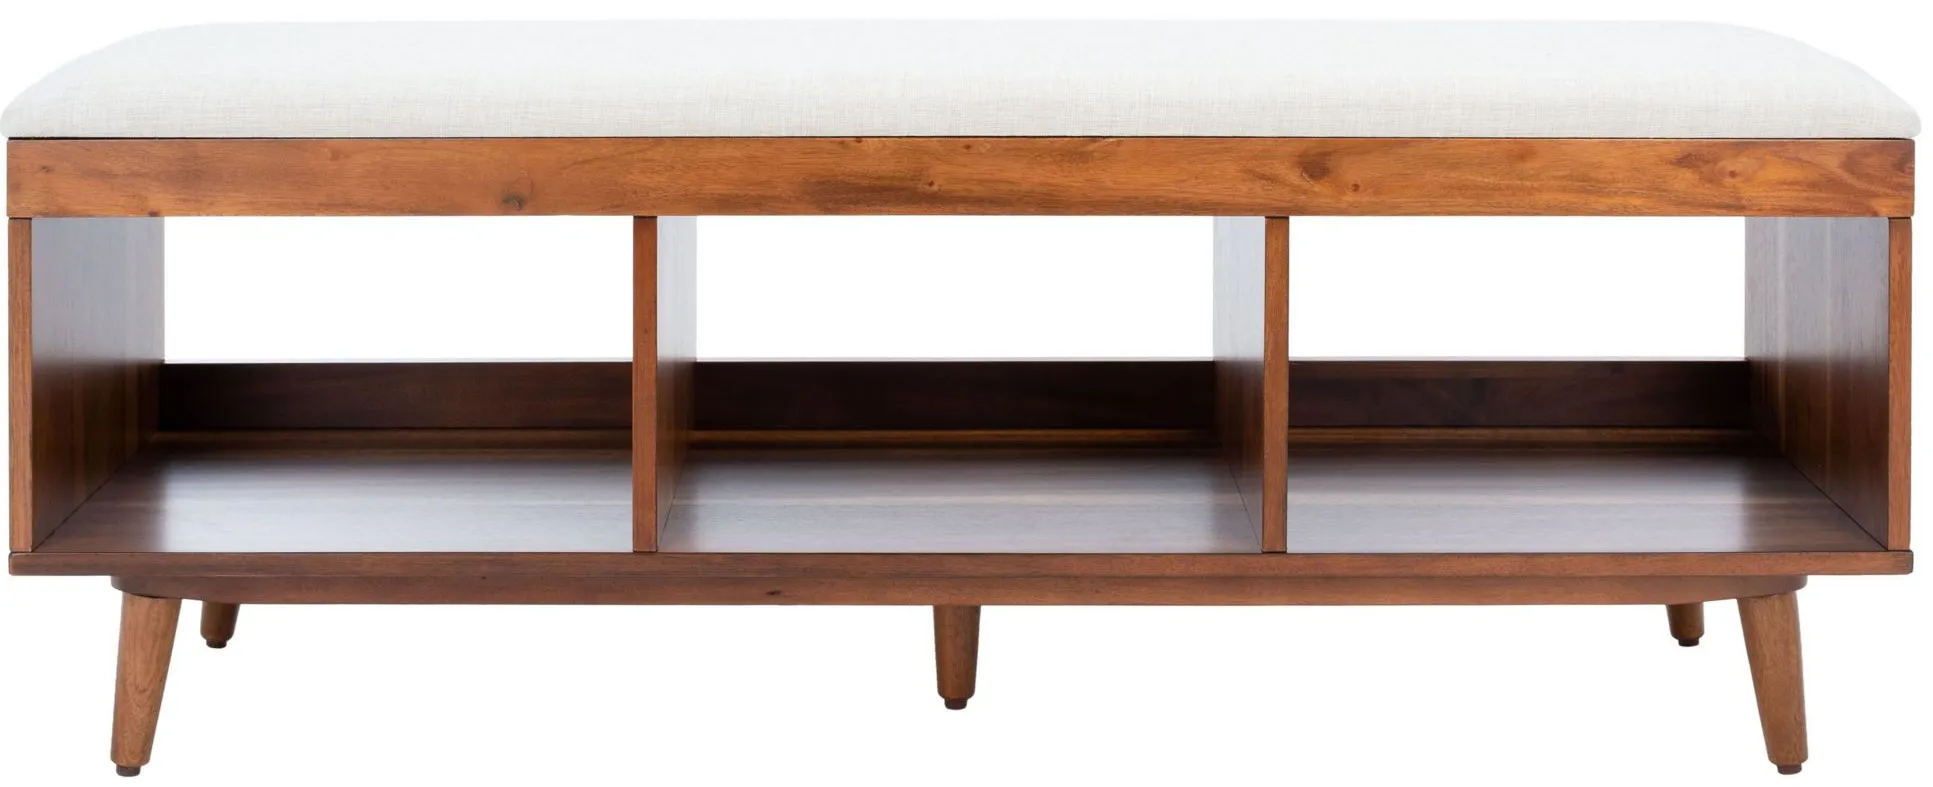 Cricket Open Shelf Bench with Cushion in Cream / Natural Acacia by Safavieh